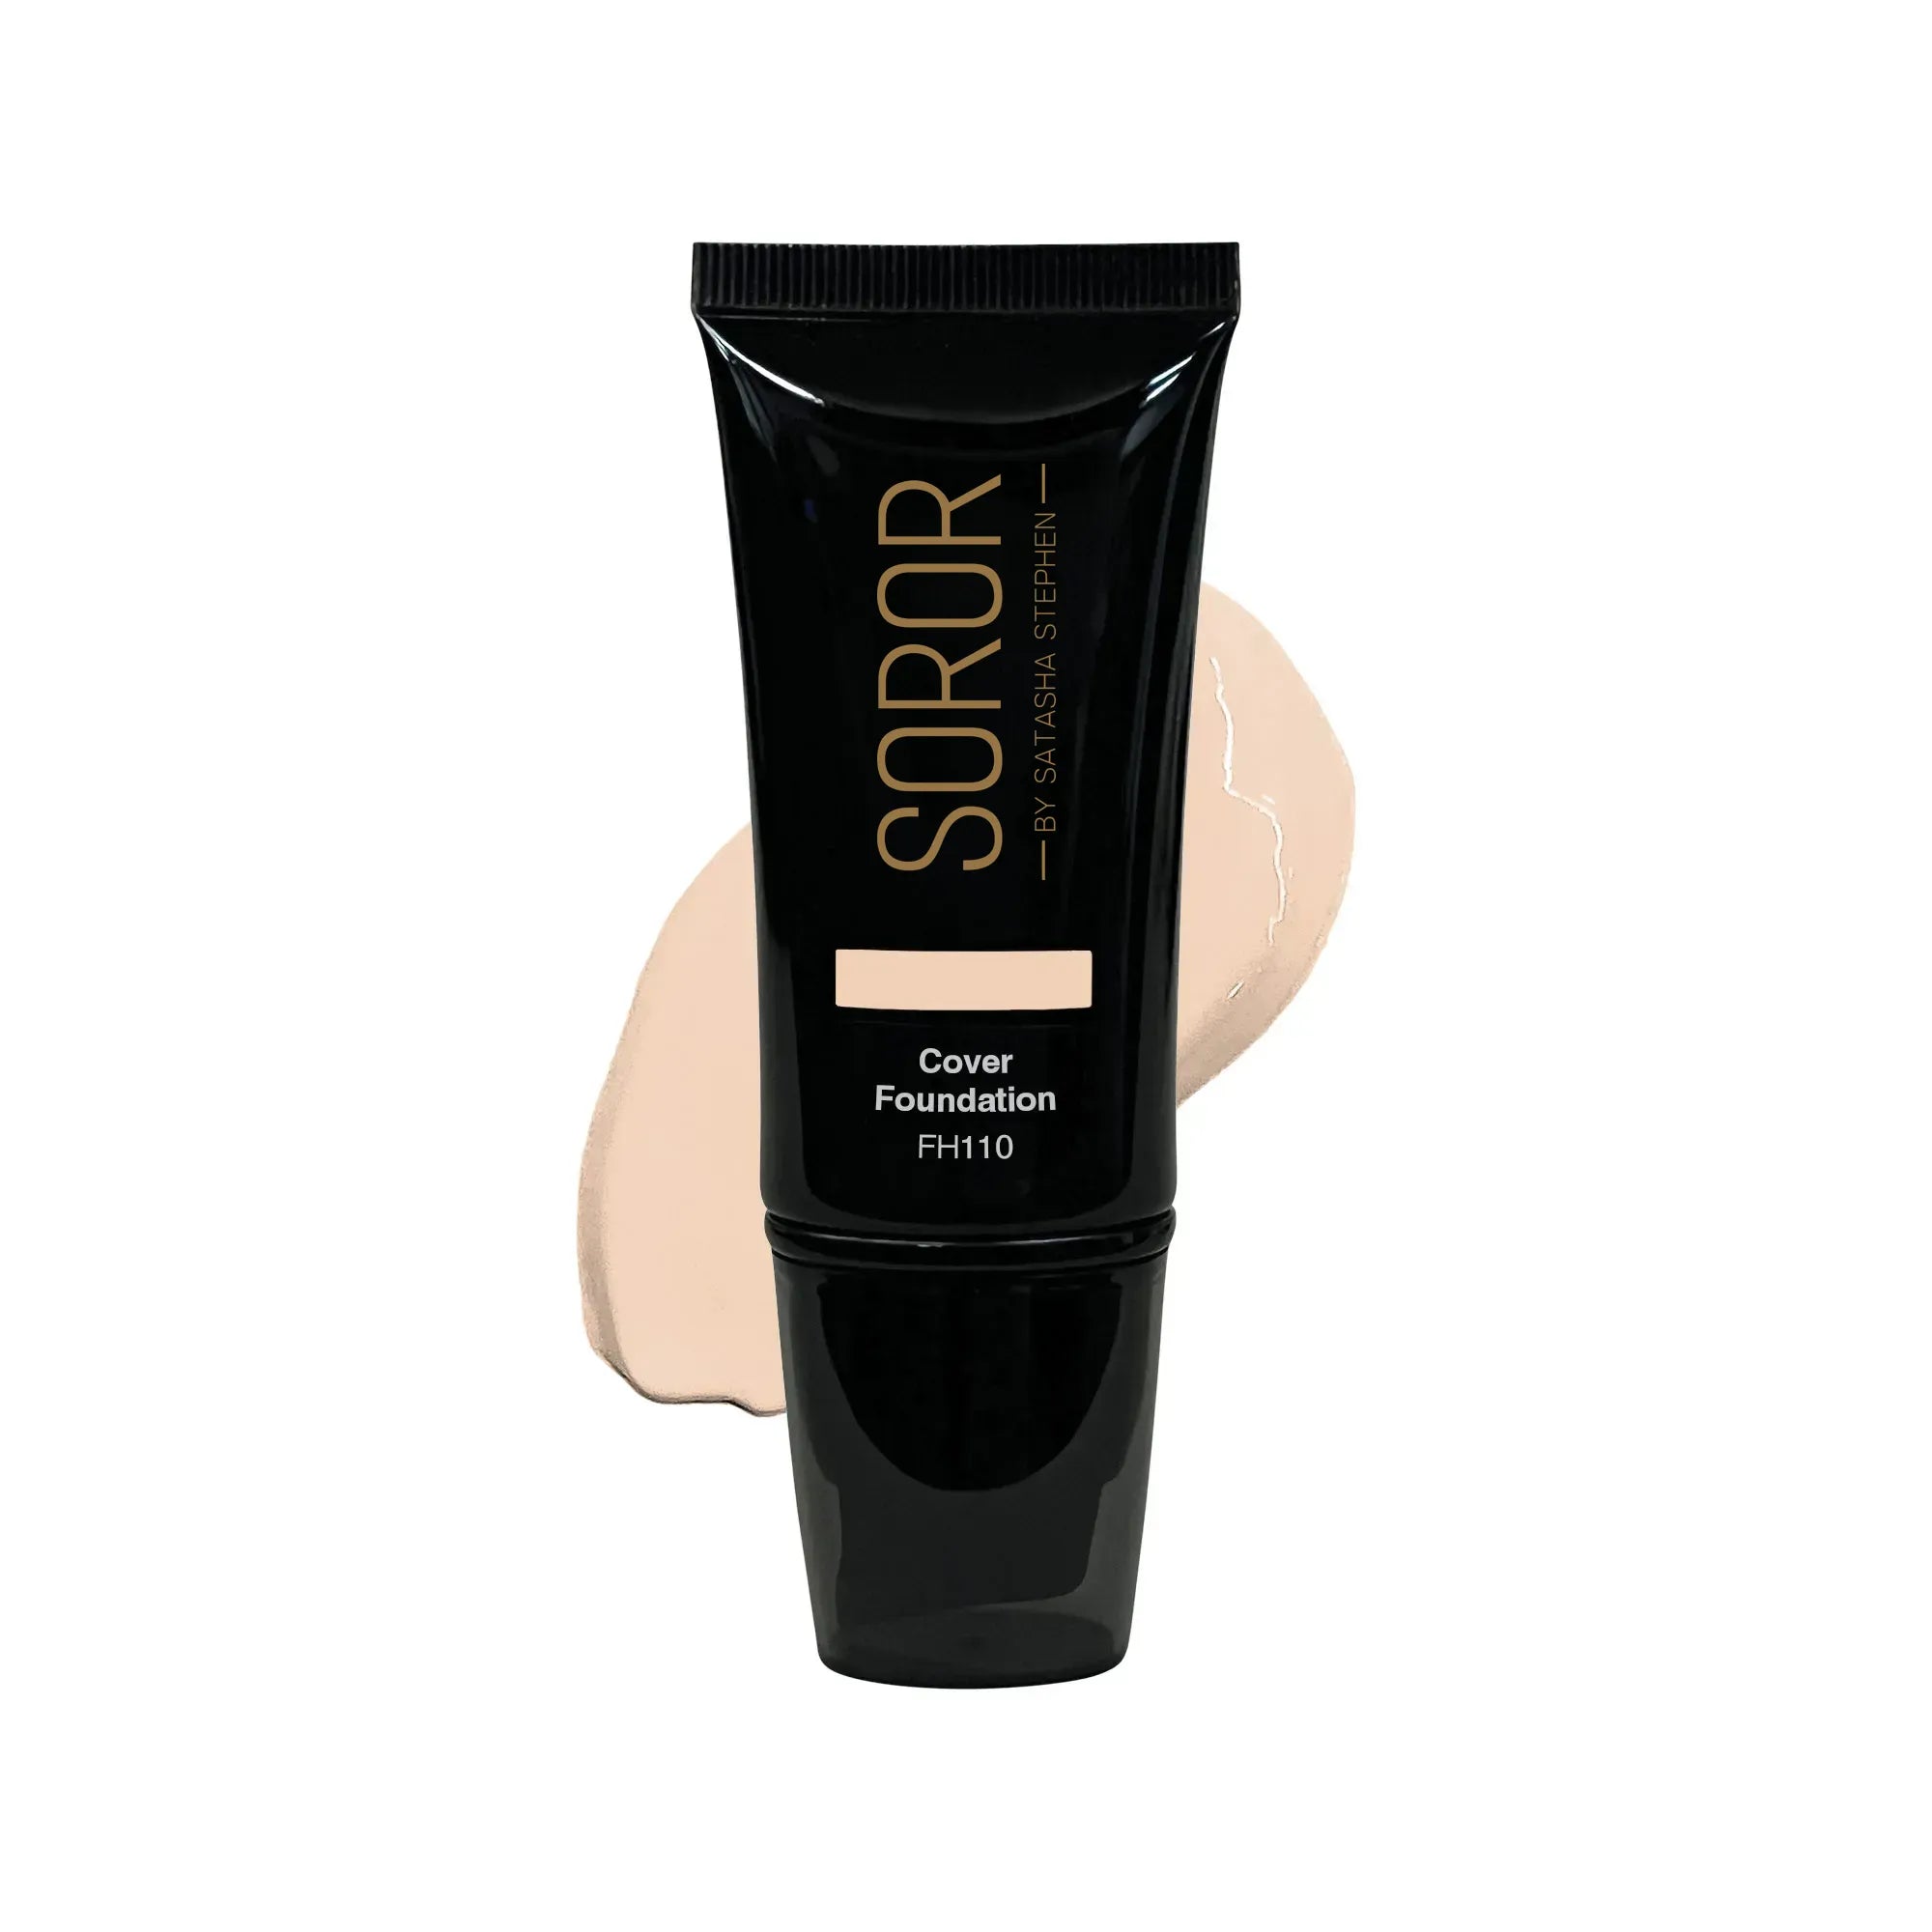 Full Coverage Foundation - Layer